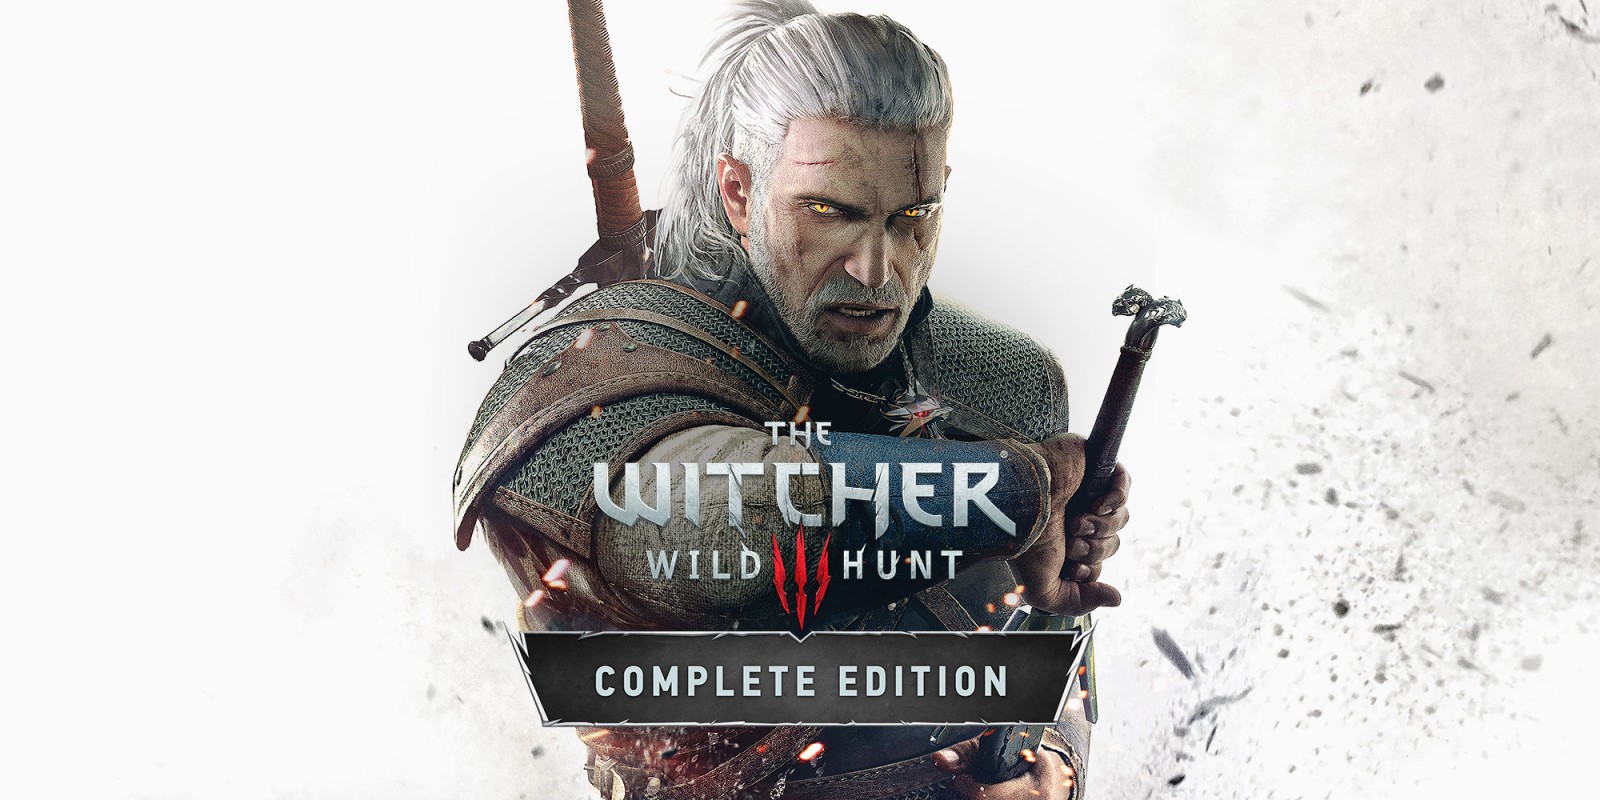 The Witcher 3: Wild Hunt Complete Edition – Anteprima